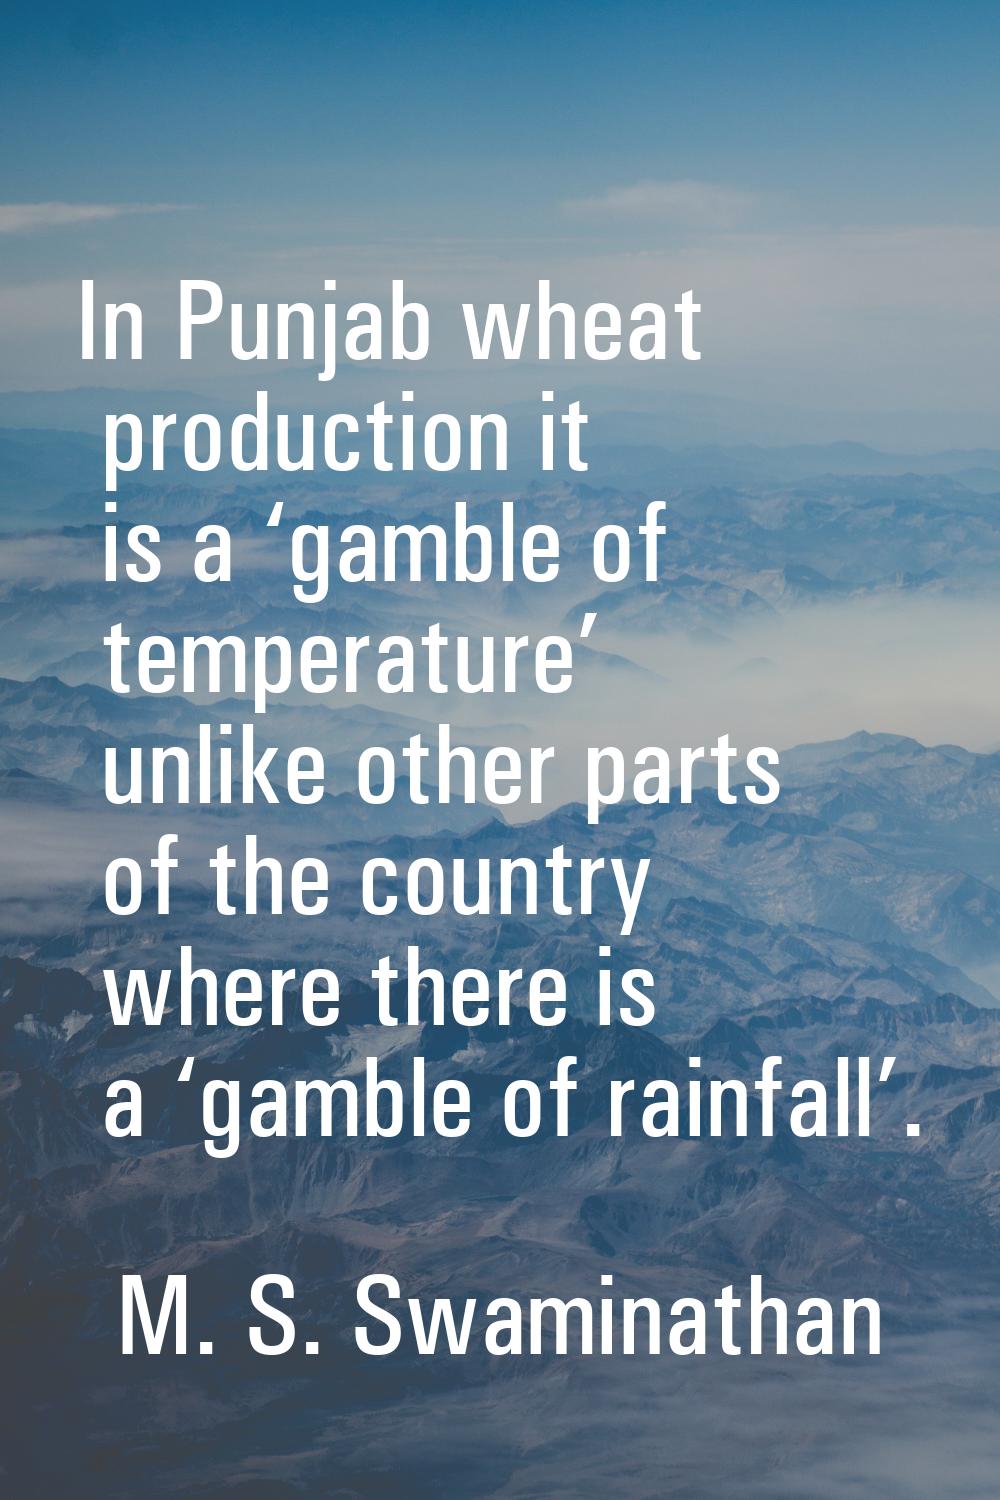 In Punjab wheat production it is a ‘gamble of temperature’ unlike other parts of the country where 